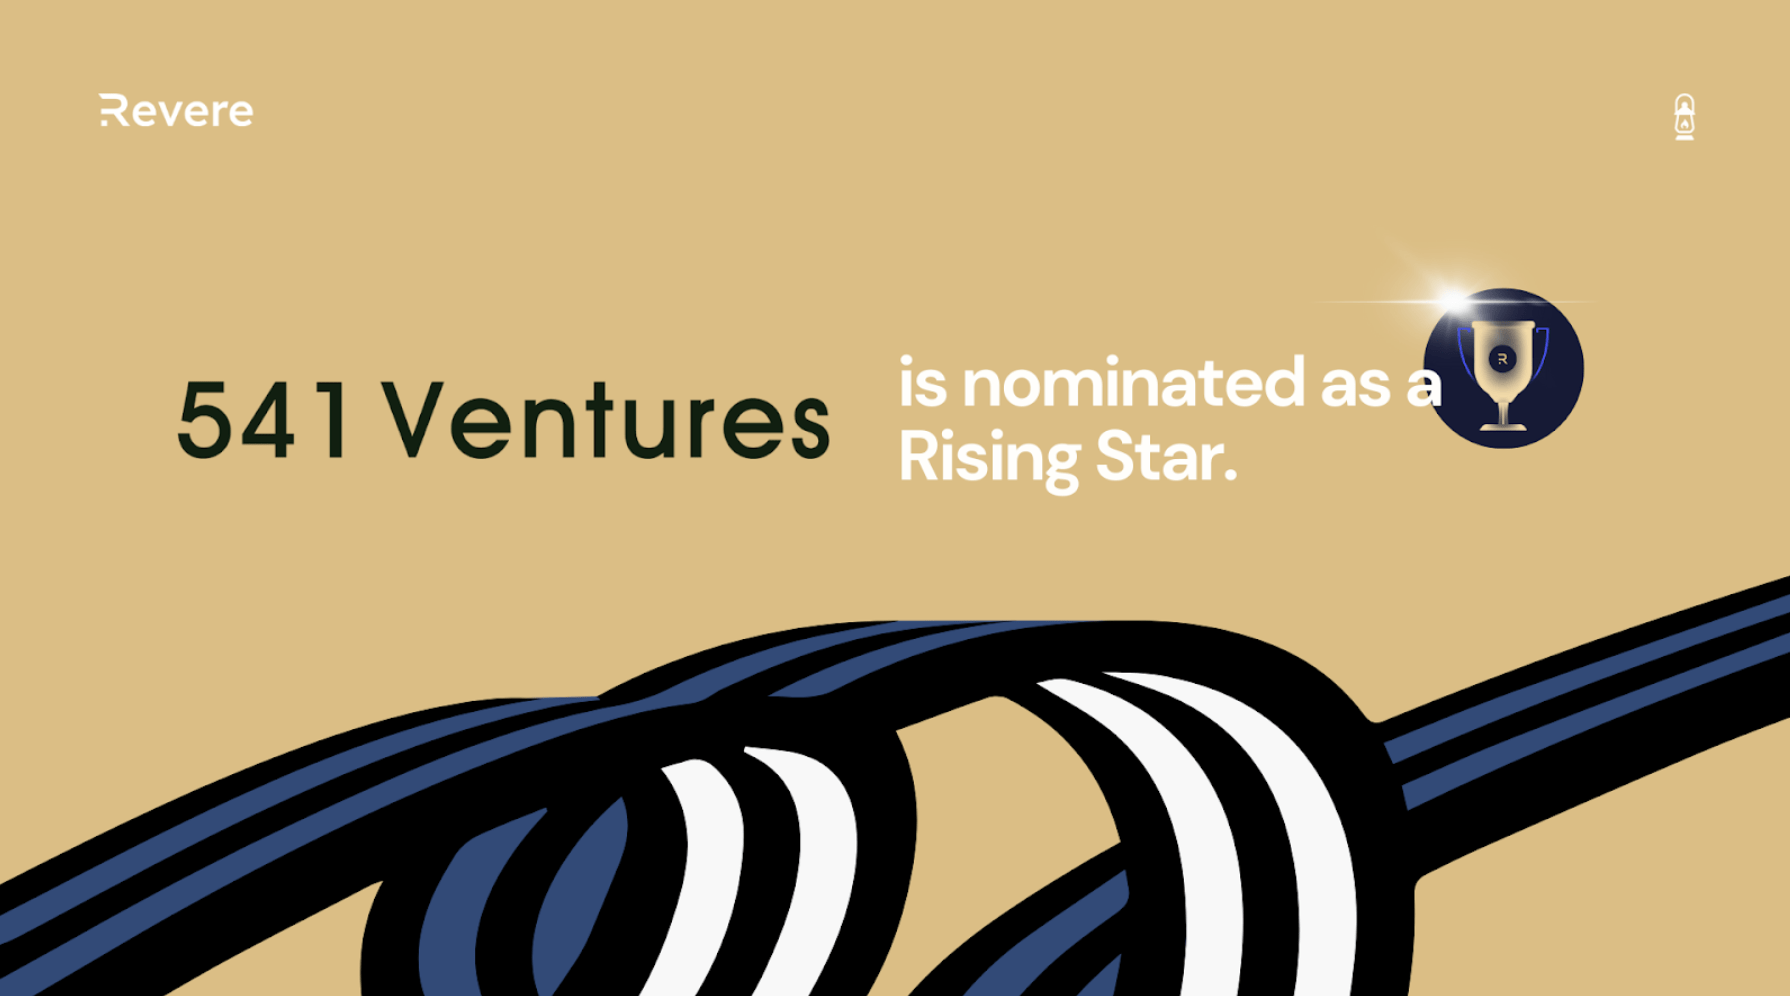 541 Ventures recognized as Rising Star by Revere